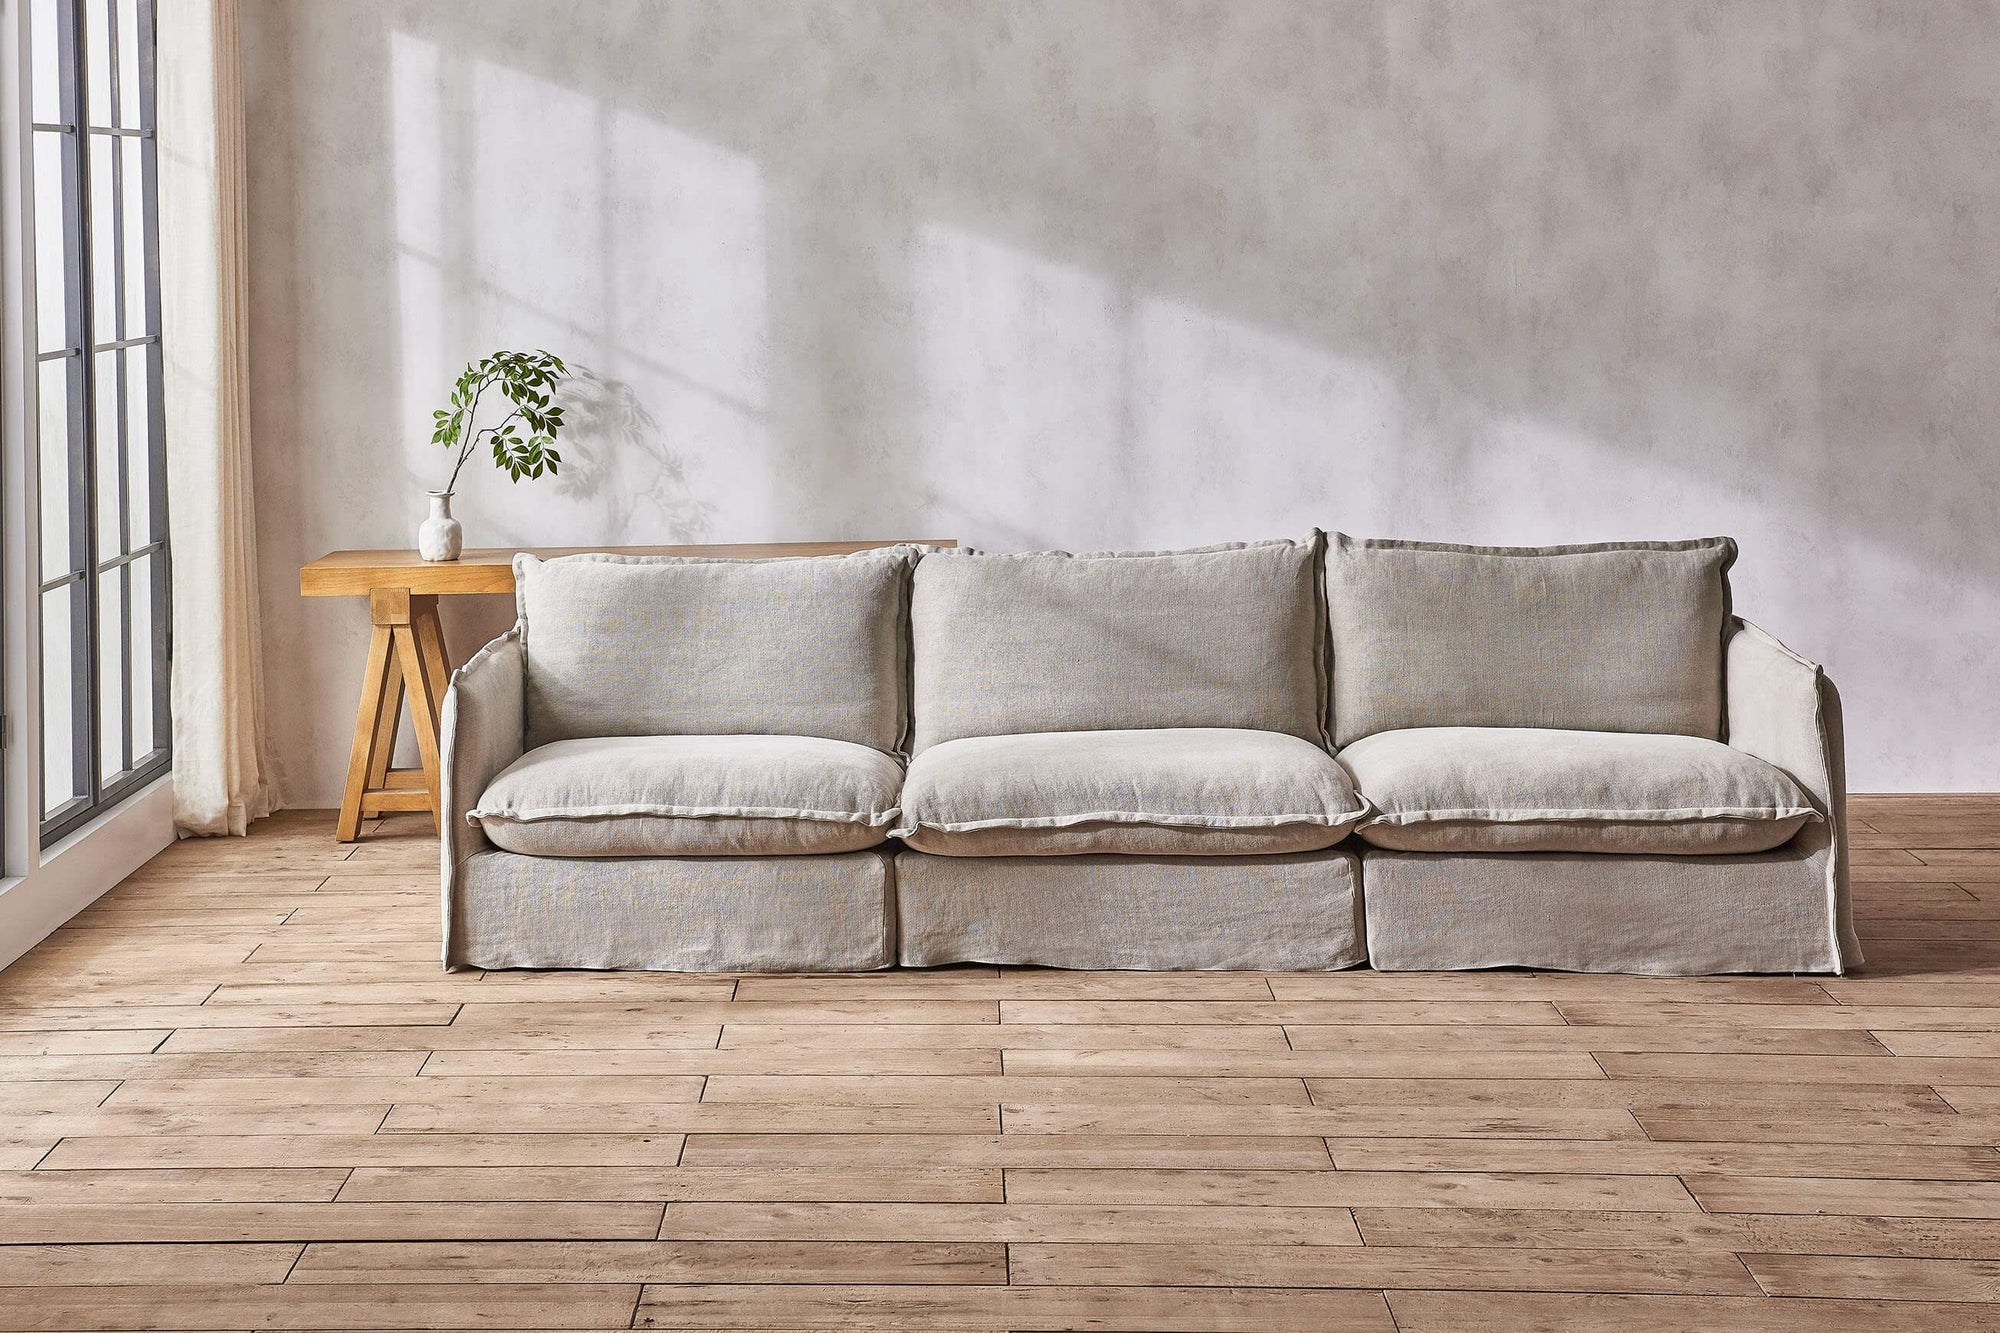 Neva Sectional Sofa in Jasmine Rice, a light warm greige Medium Weight Linen, placed in a sunlit room in front of a Rylance Console Table with a small plant